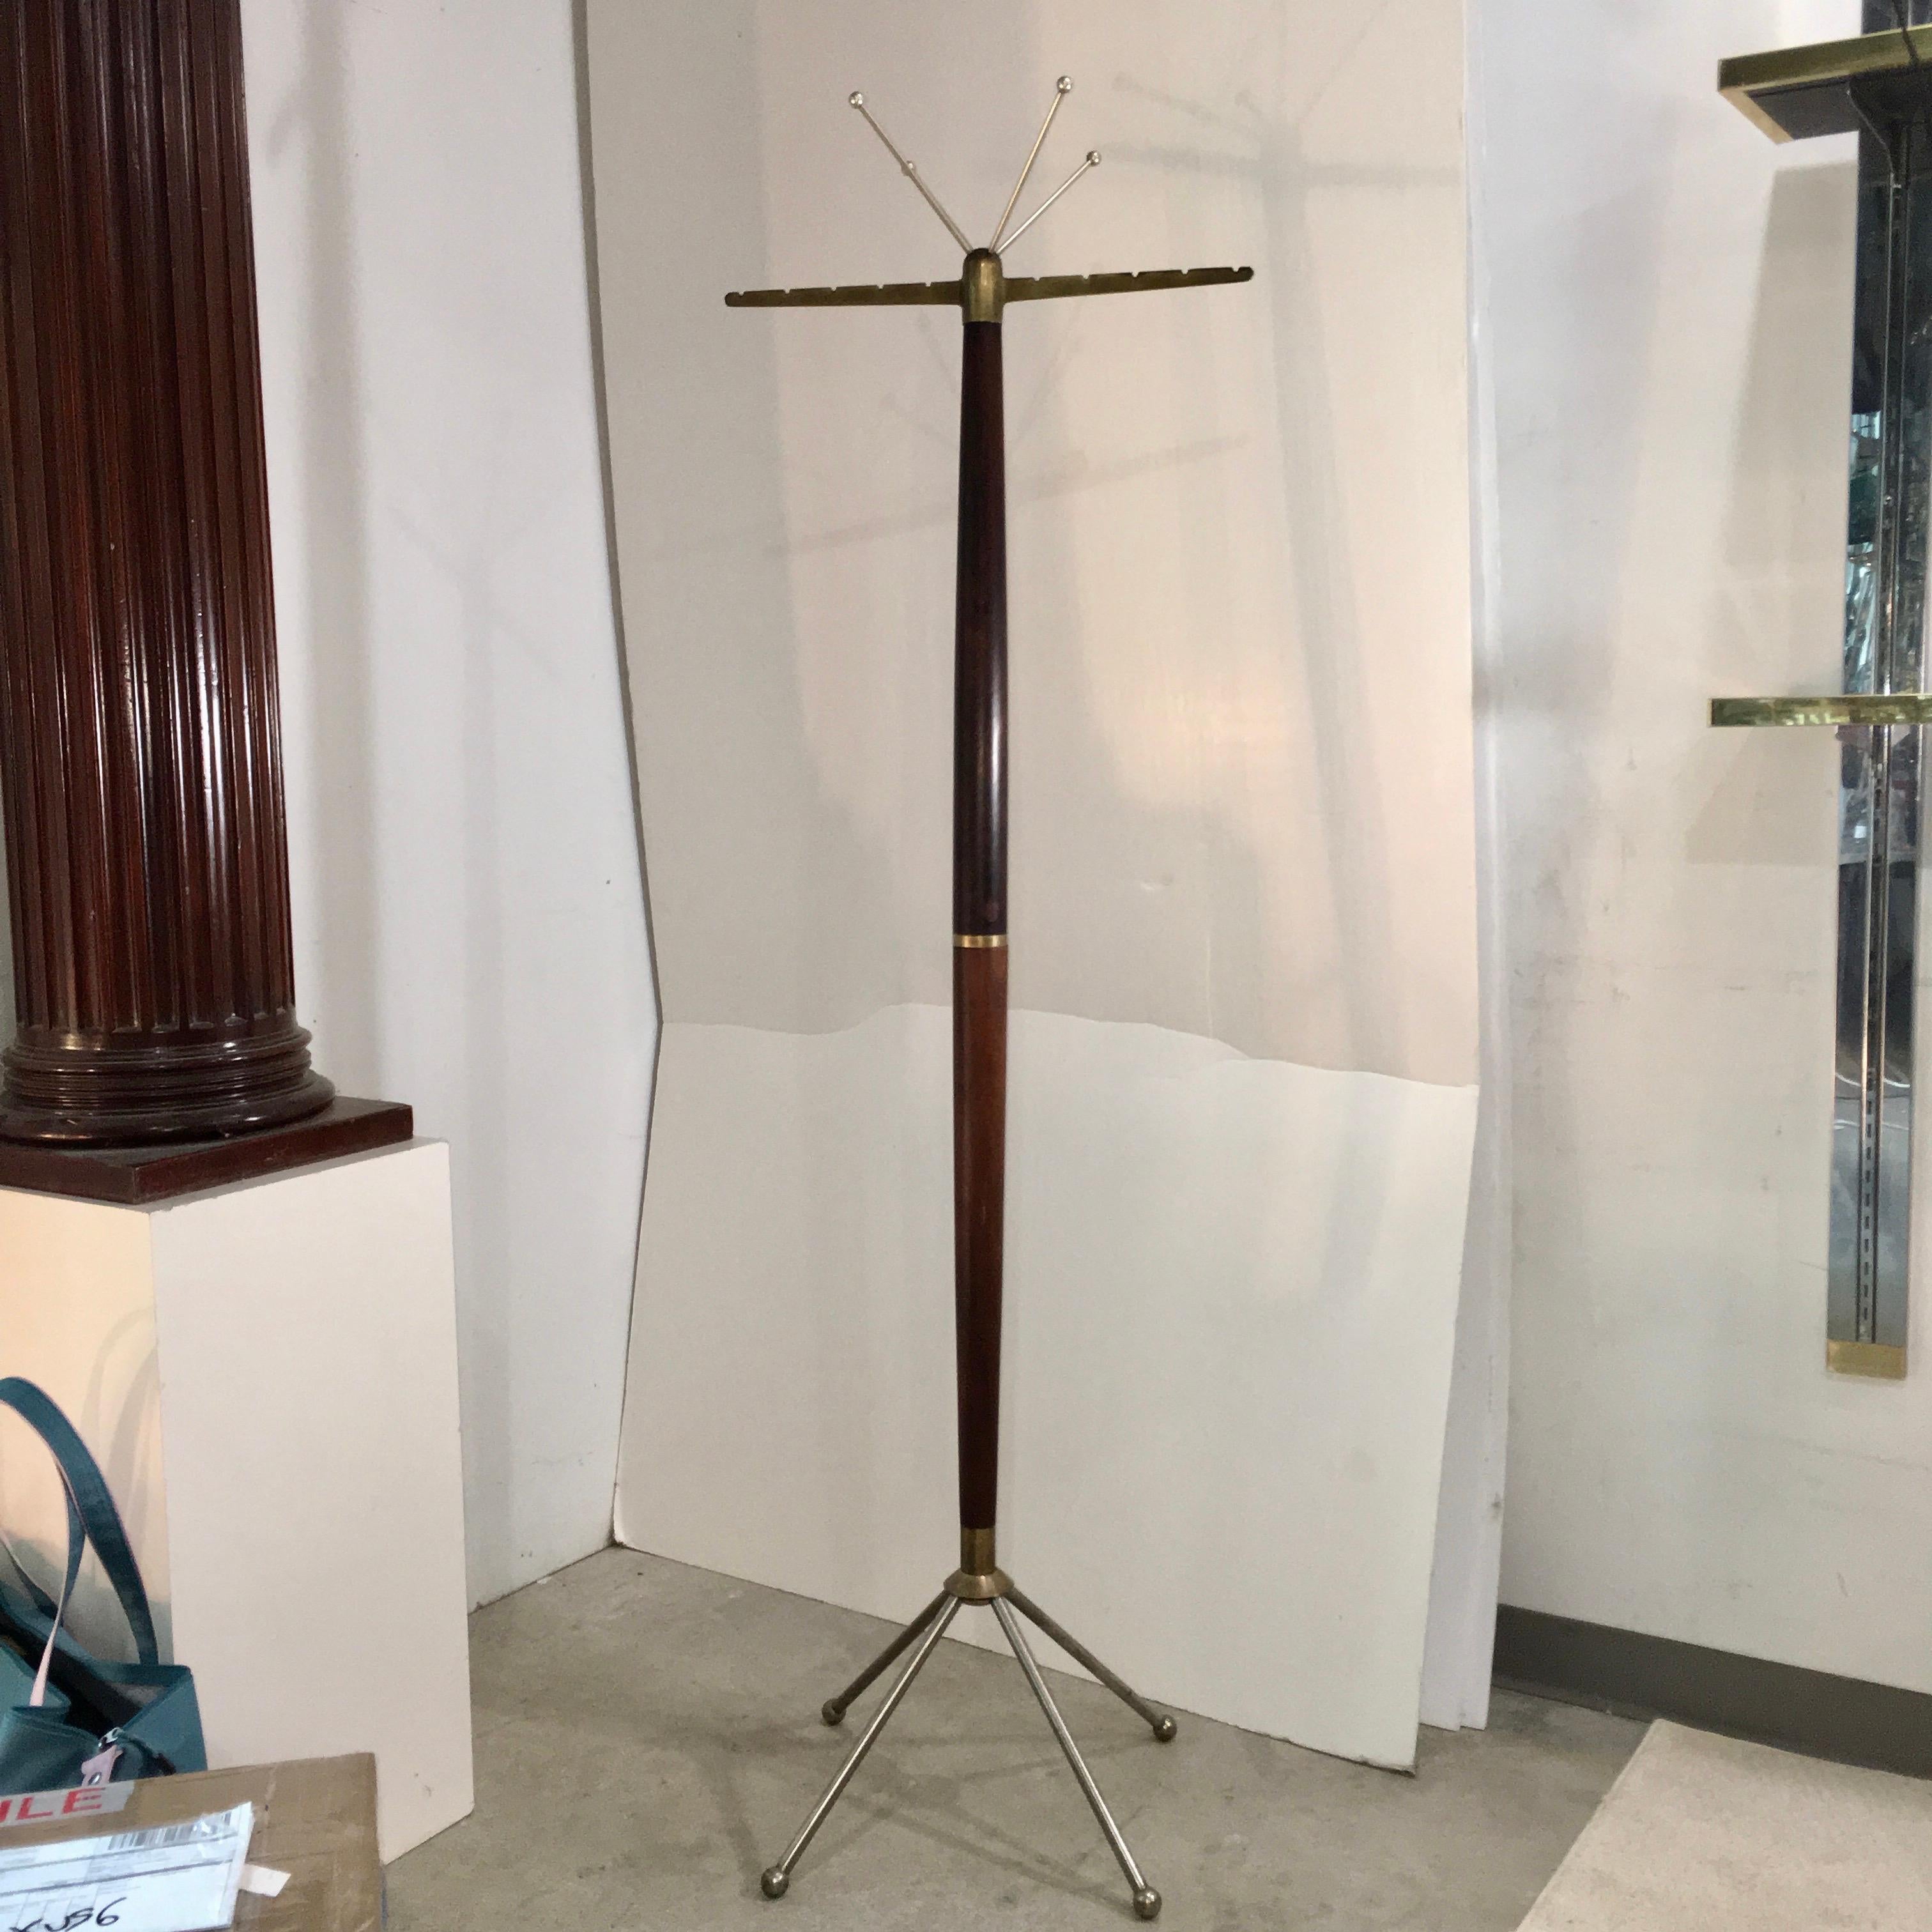 Stylish and sculptural 1950s Italian standing coat rack in tapered walnut with gilt metal accents. Includes four wood coat hangers from the Grand Hotel Bristol di Merano.